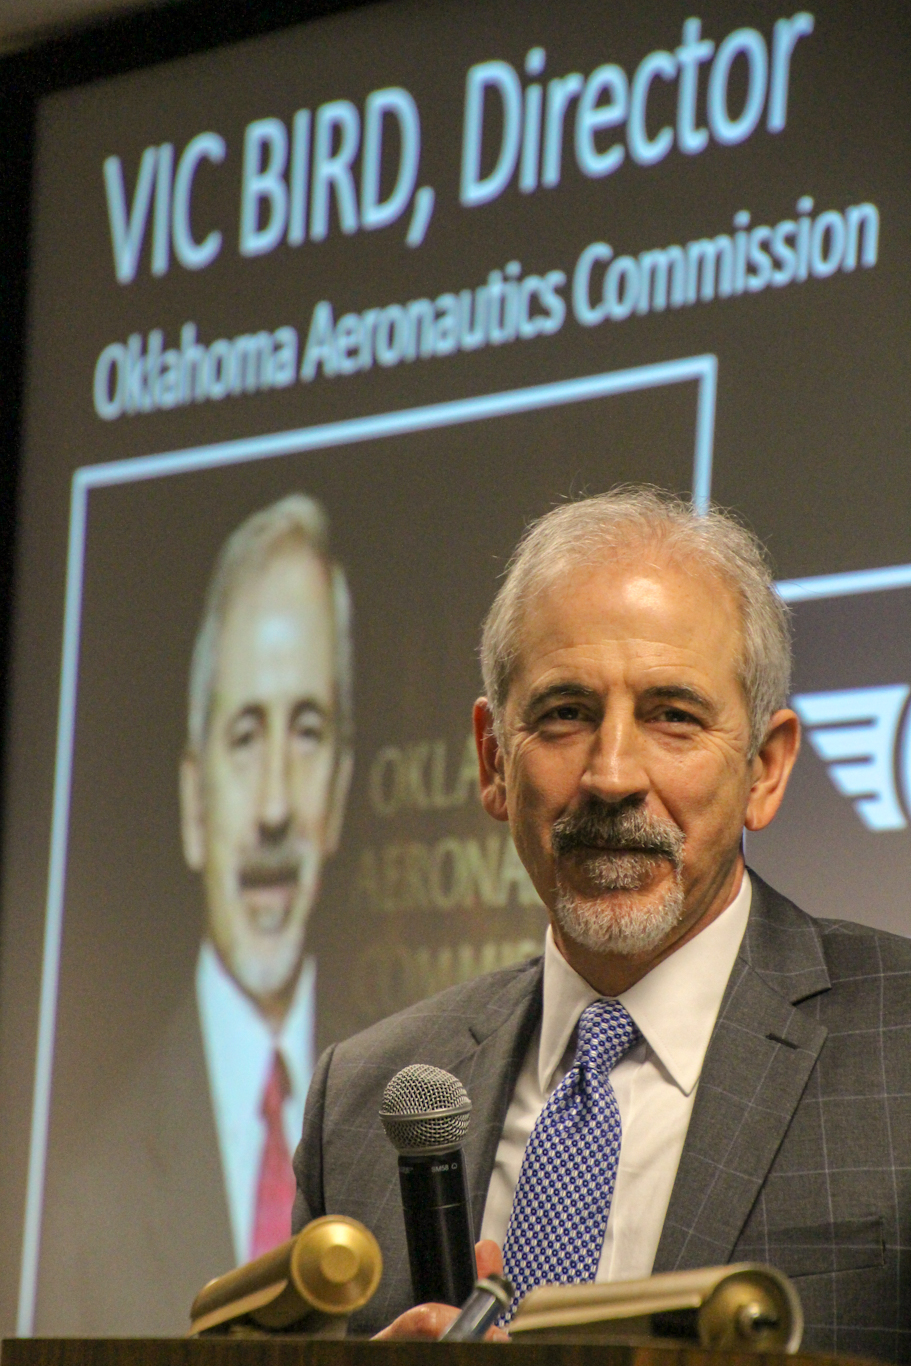 Retired Oklahoma Aeronautics Commission Director Victor Bird Named CEO of Aircraft Towing Systems